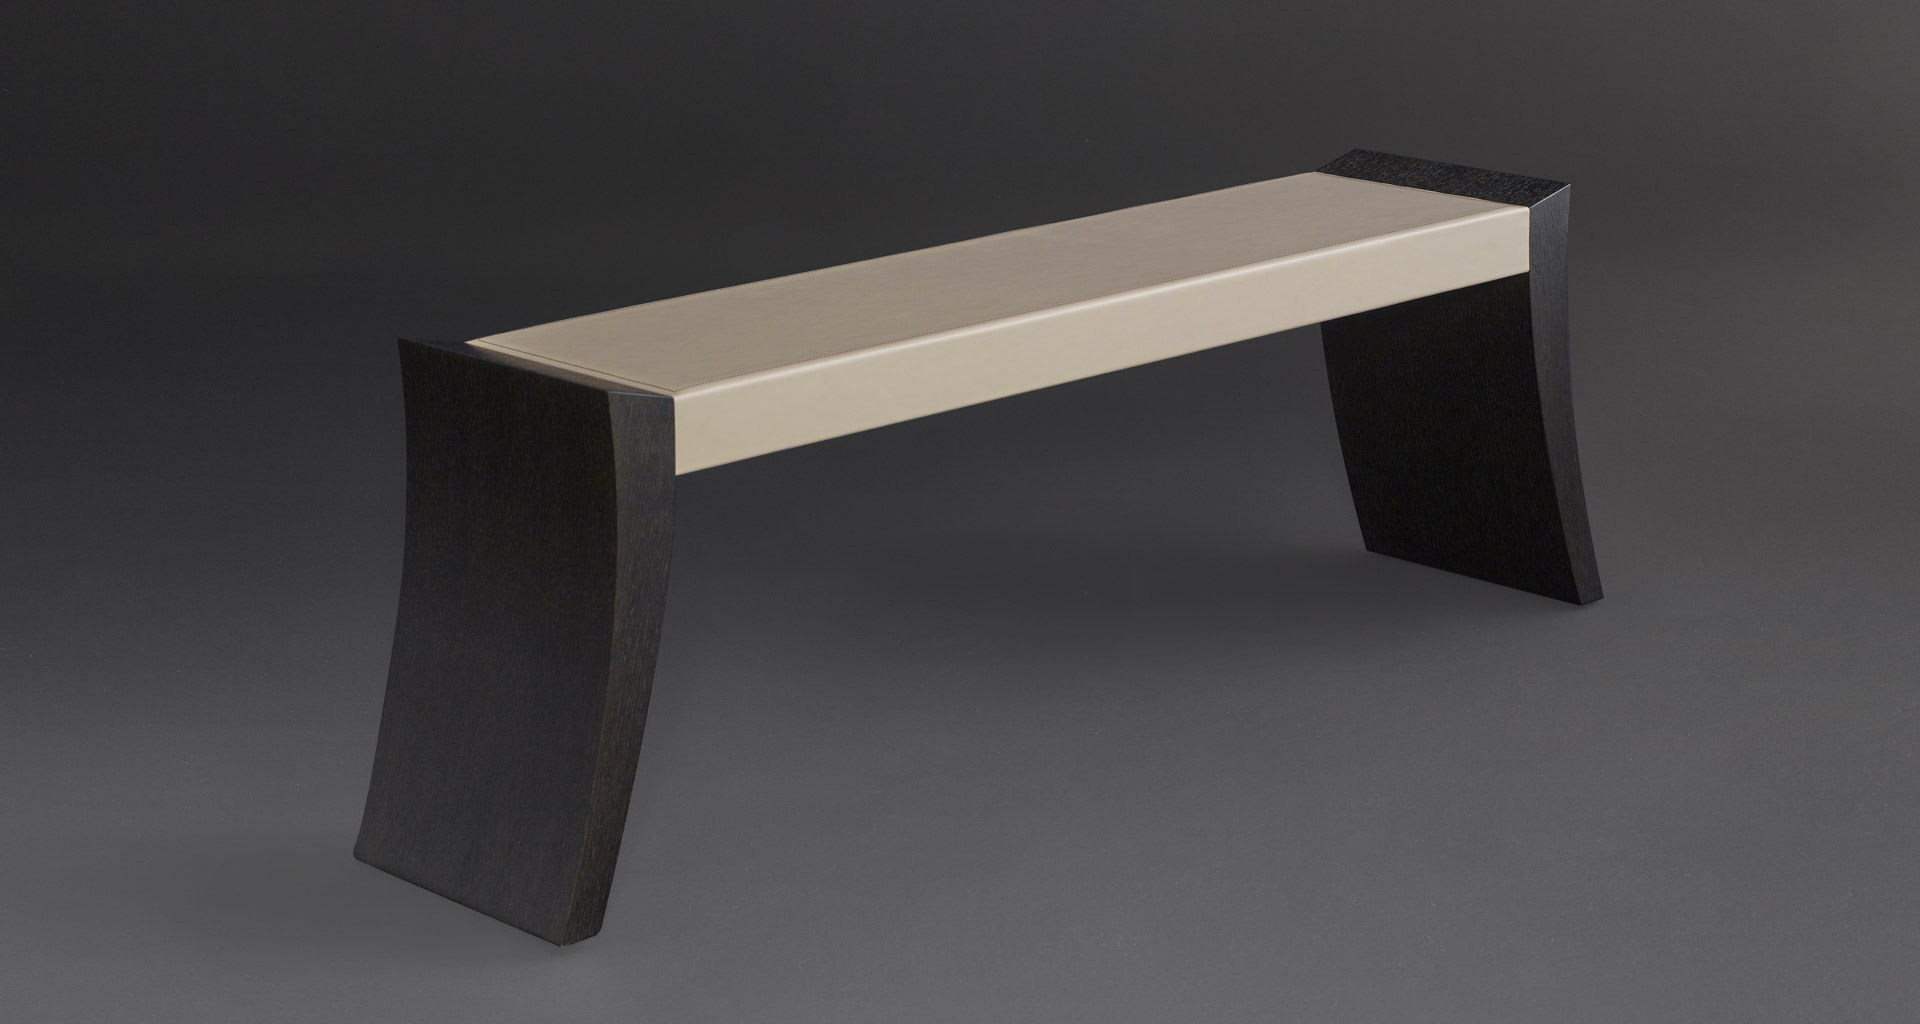 Saphire is a wooden bench, available with leather or galuchat top, from Promemoria's catalogue | Promemoria